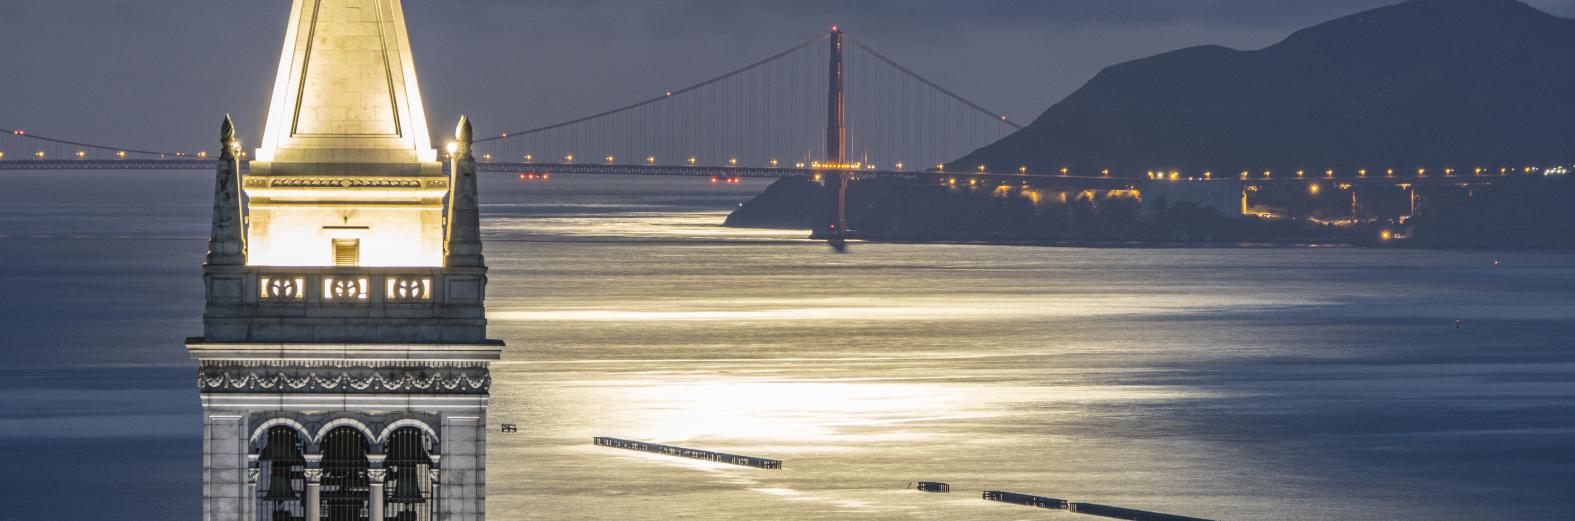 Photo of the Golden Gate Bridge at night, with Berkeley's campanile in the foreground